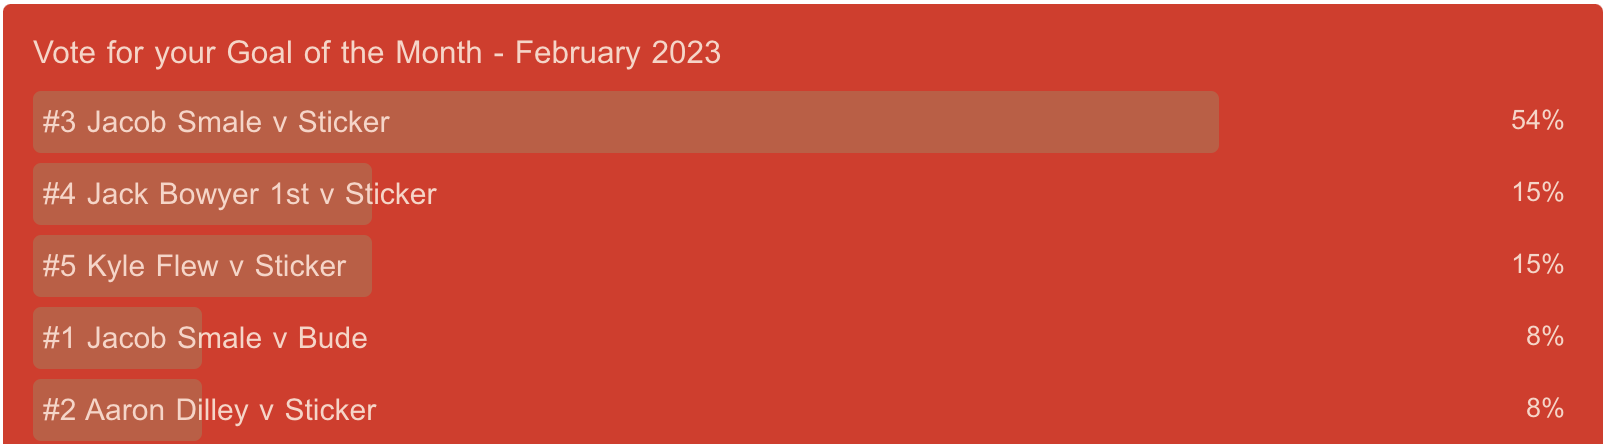 Goal of the Month Results - February 2023